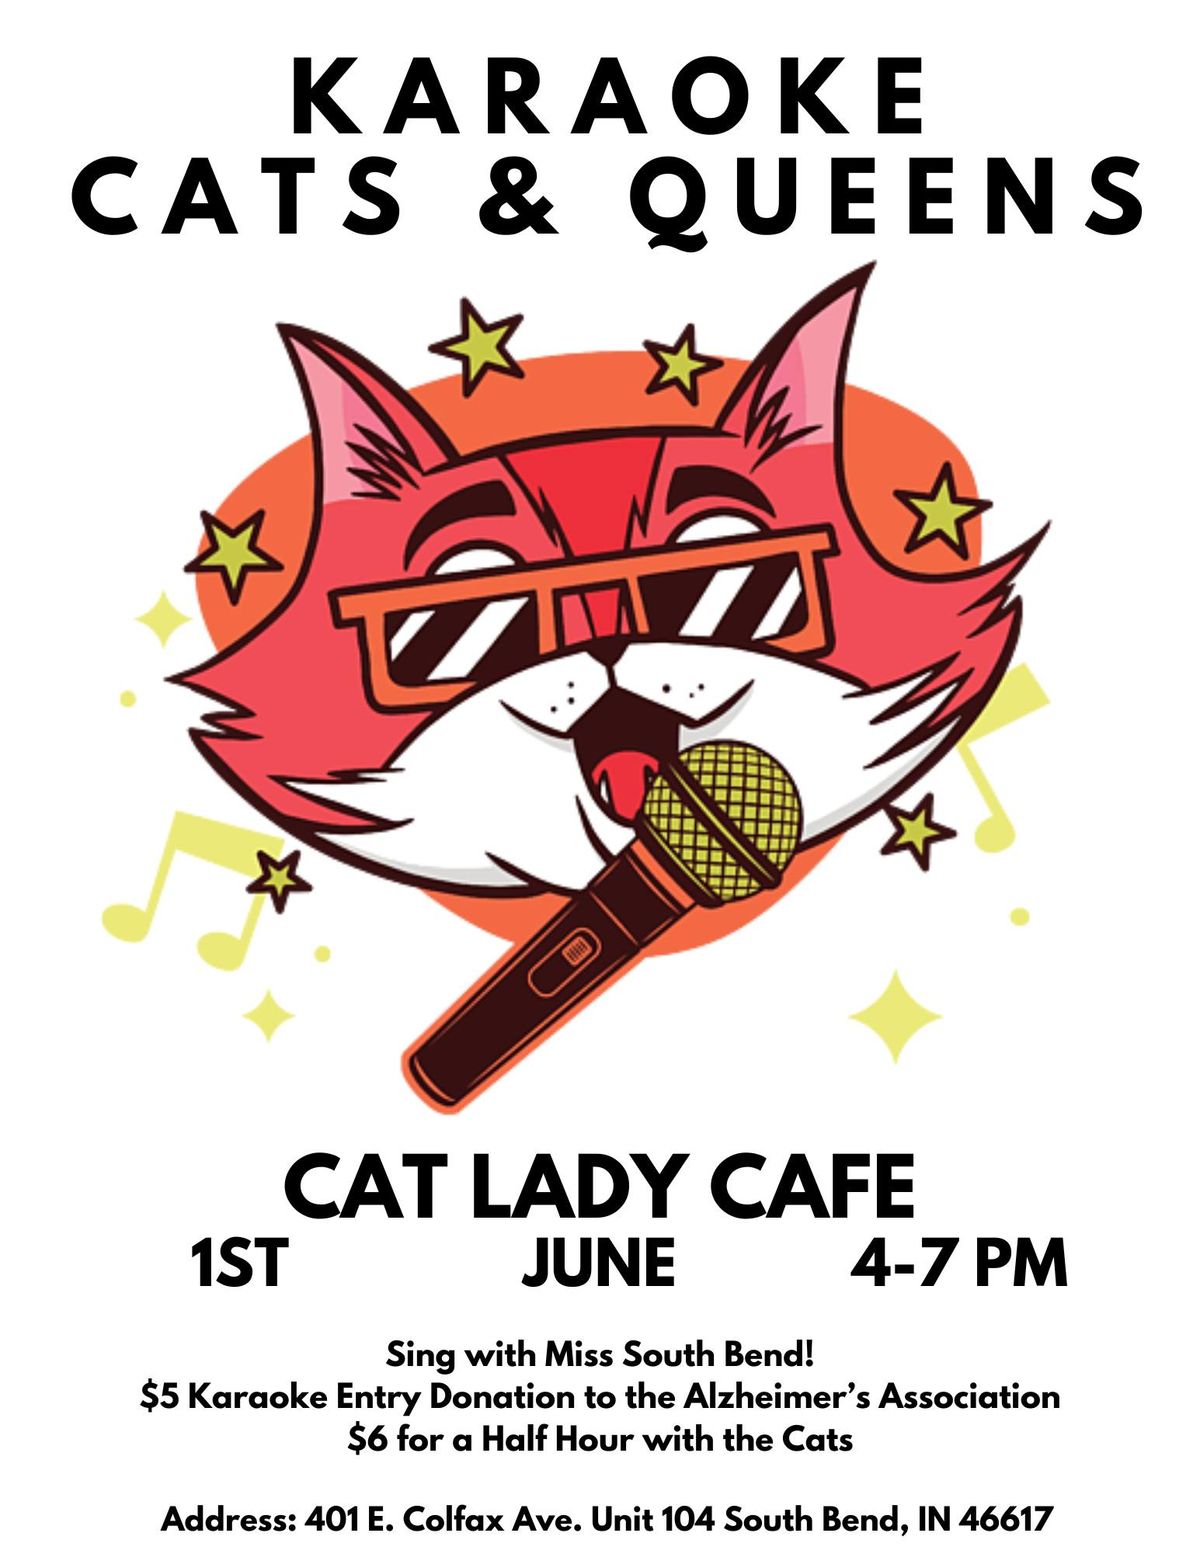 Karaoke, Cats & Queens - an ALL AGES event!